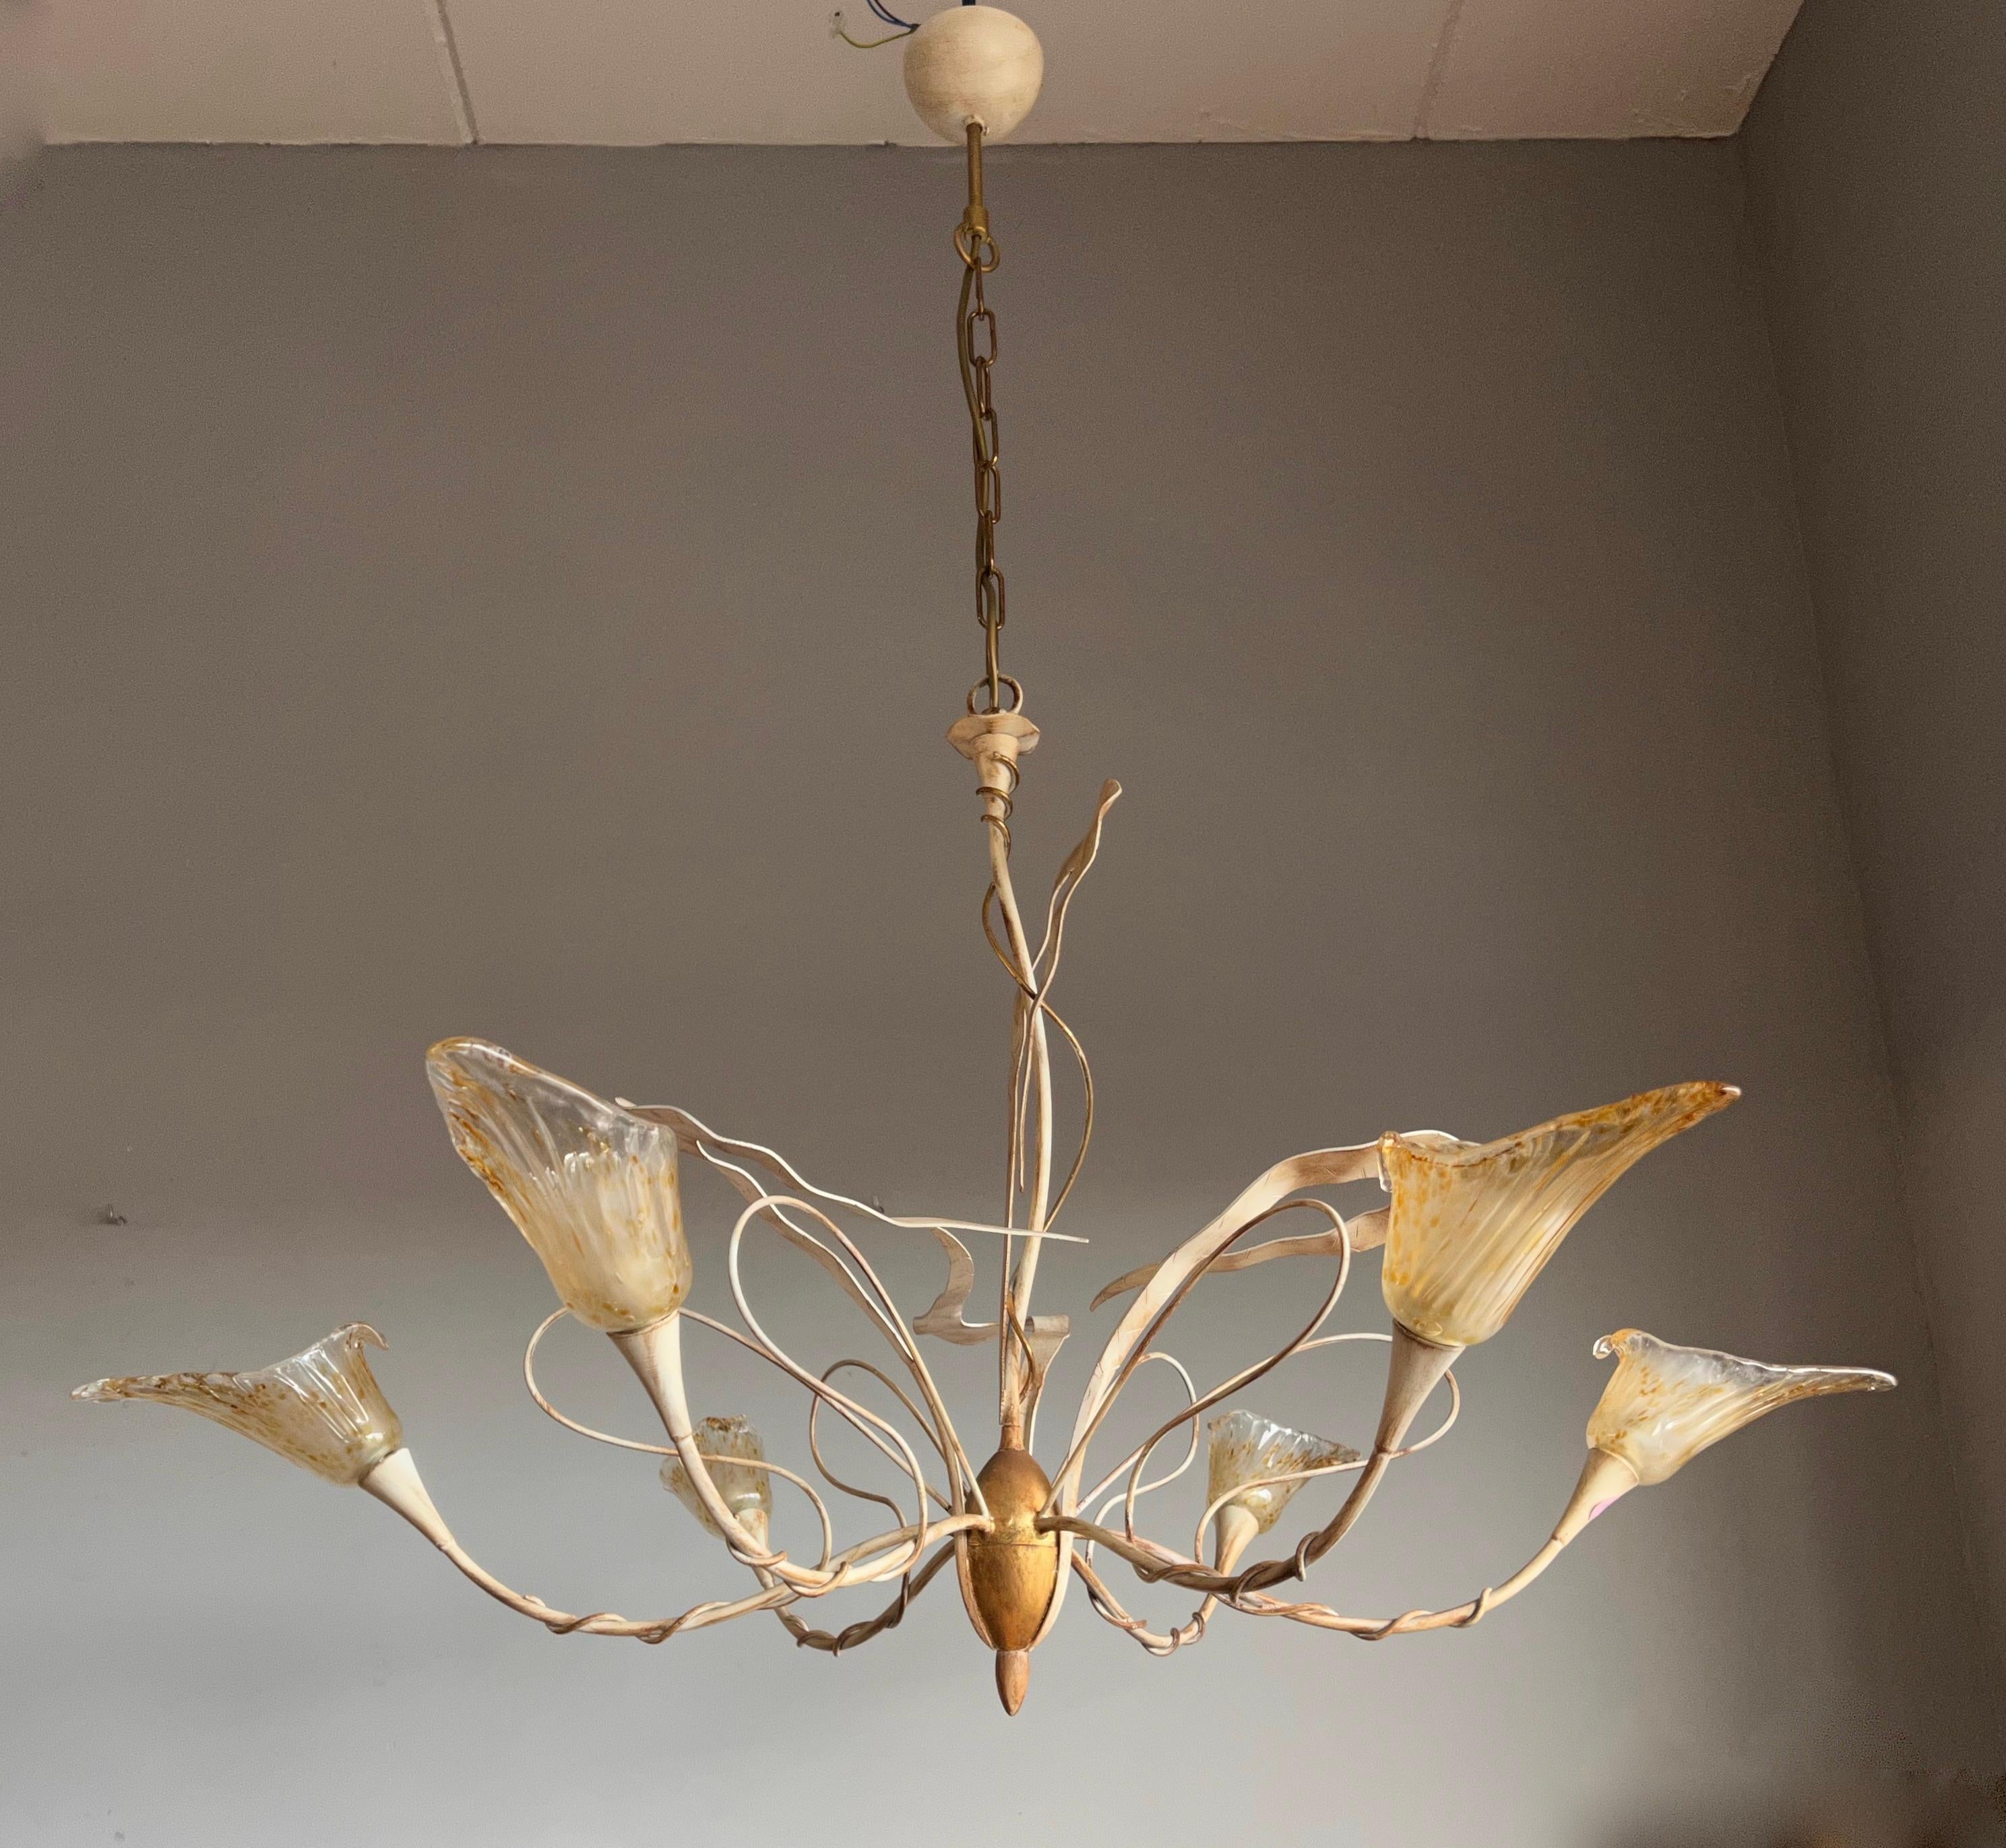 Stunning design, Italian made, modern artglass pendant light with mouth blown glass shades.

This incredibly well designed and beautifully executed chandelier is in mint condition. This quality made and finely hand-crafted metal chandelier has six